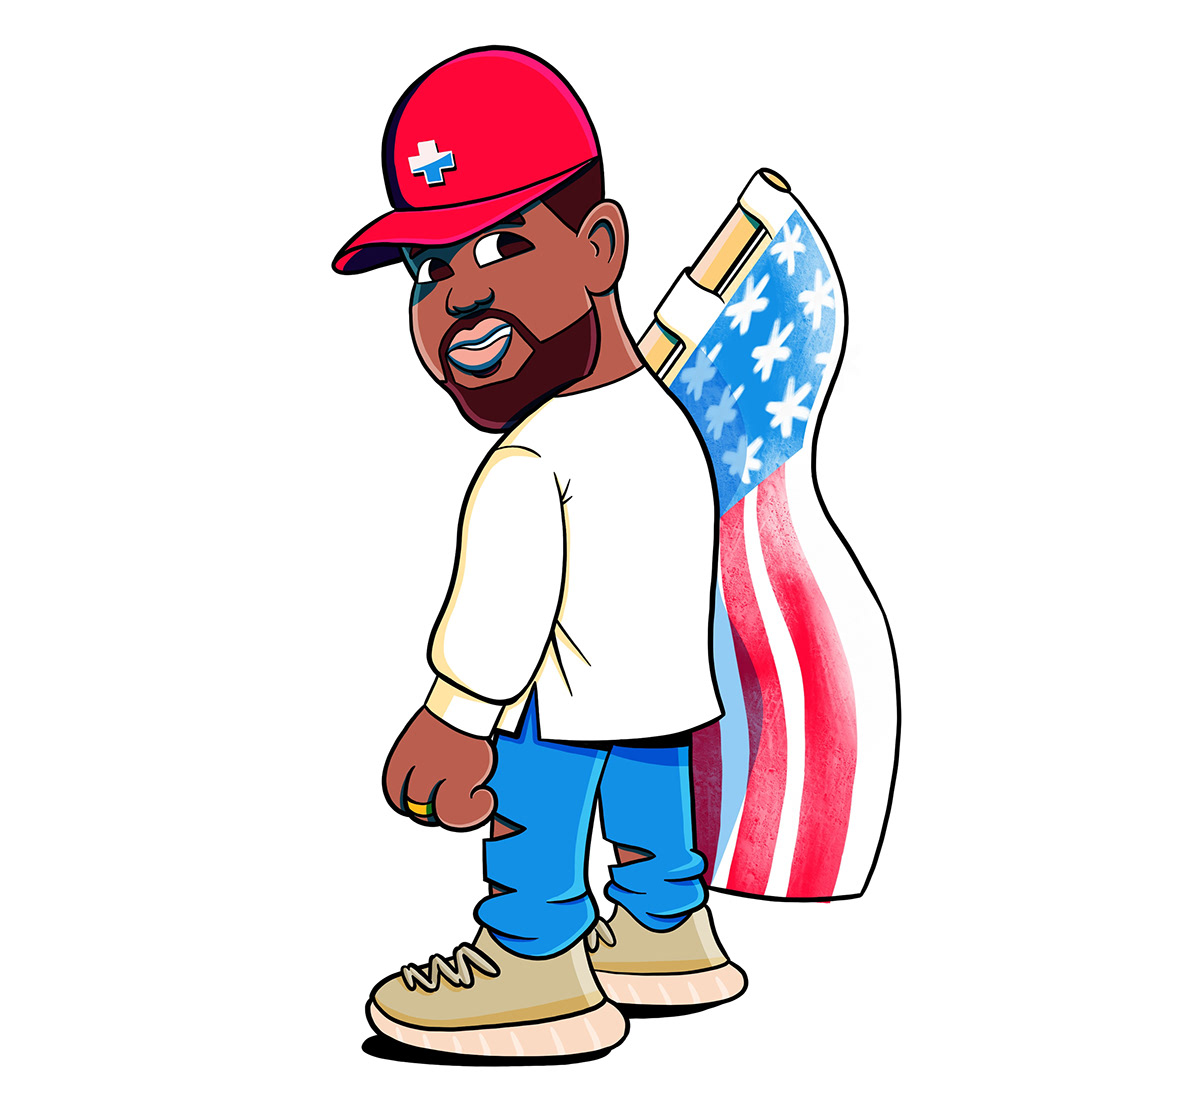 Illustration of Kanye West showing his support for America